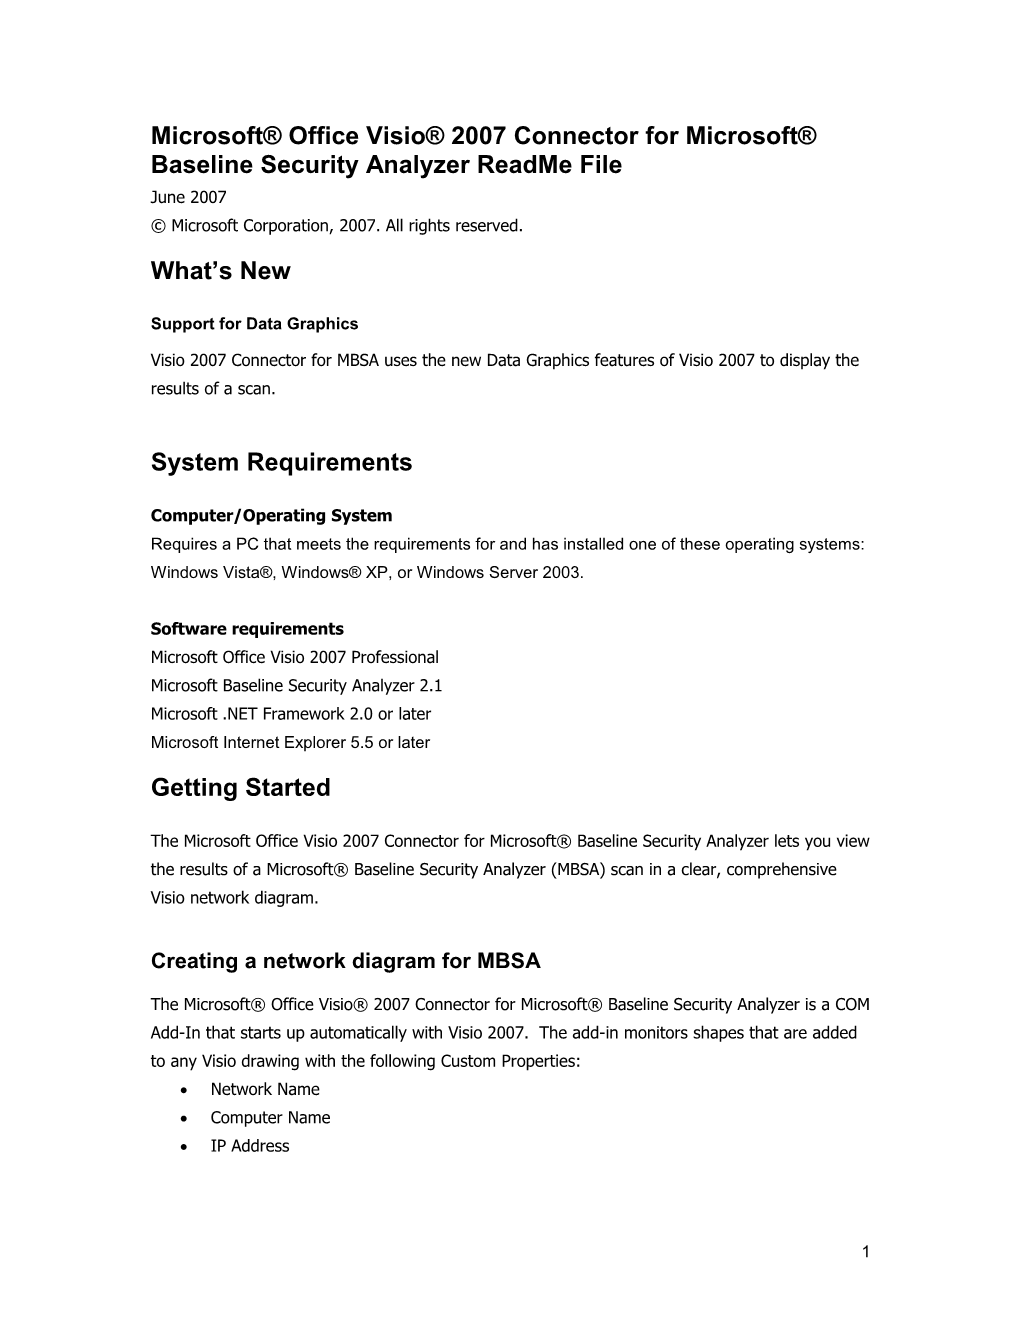 Microsoft Office Visio 2007 Connector for Microsoft Baseline Security Analyzer Readme File